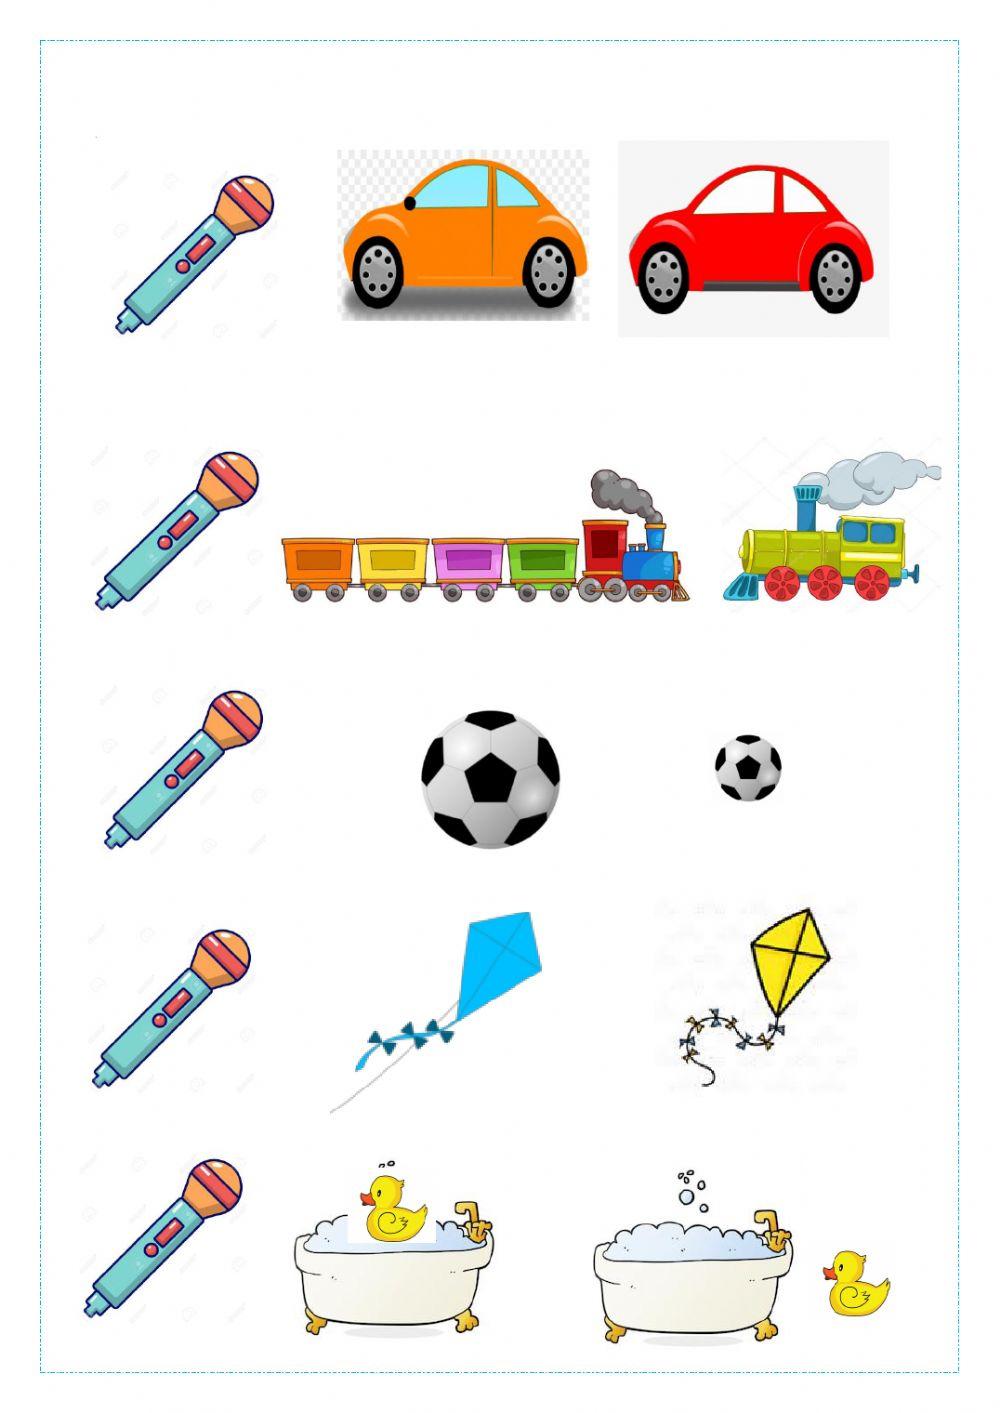 Toys, prepositions and colors